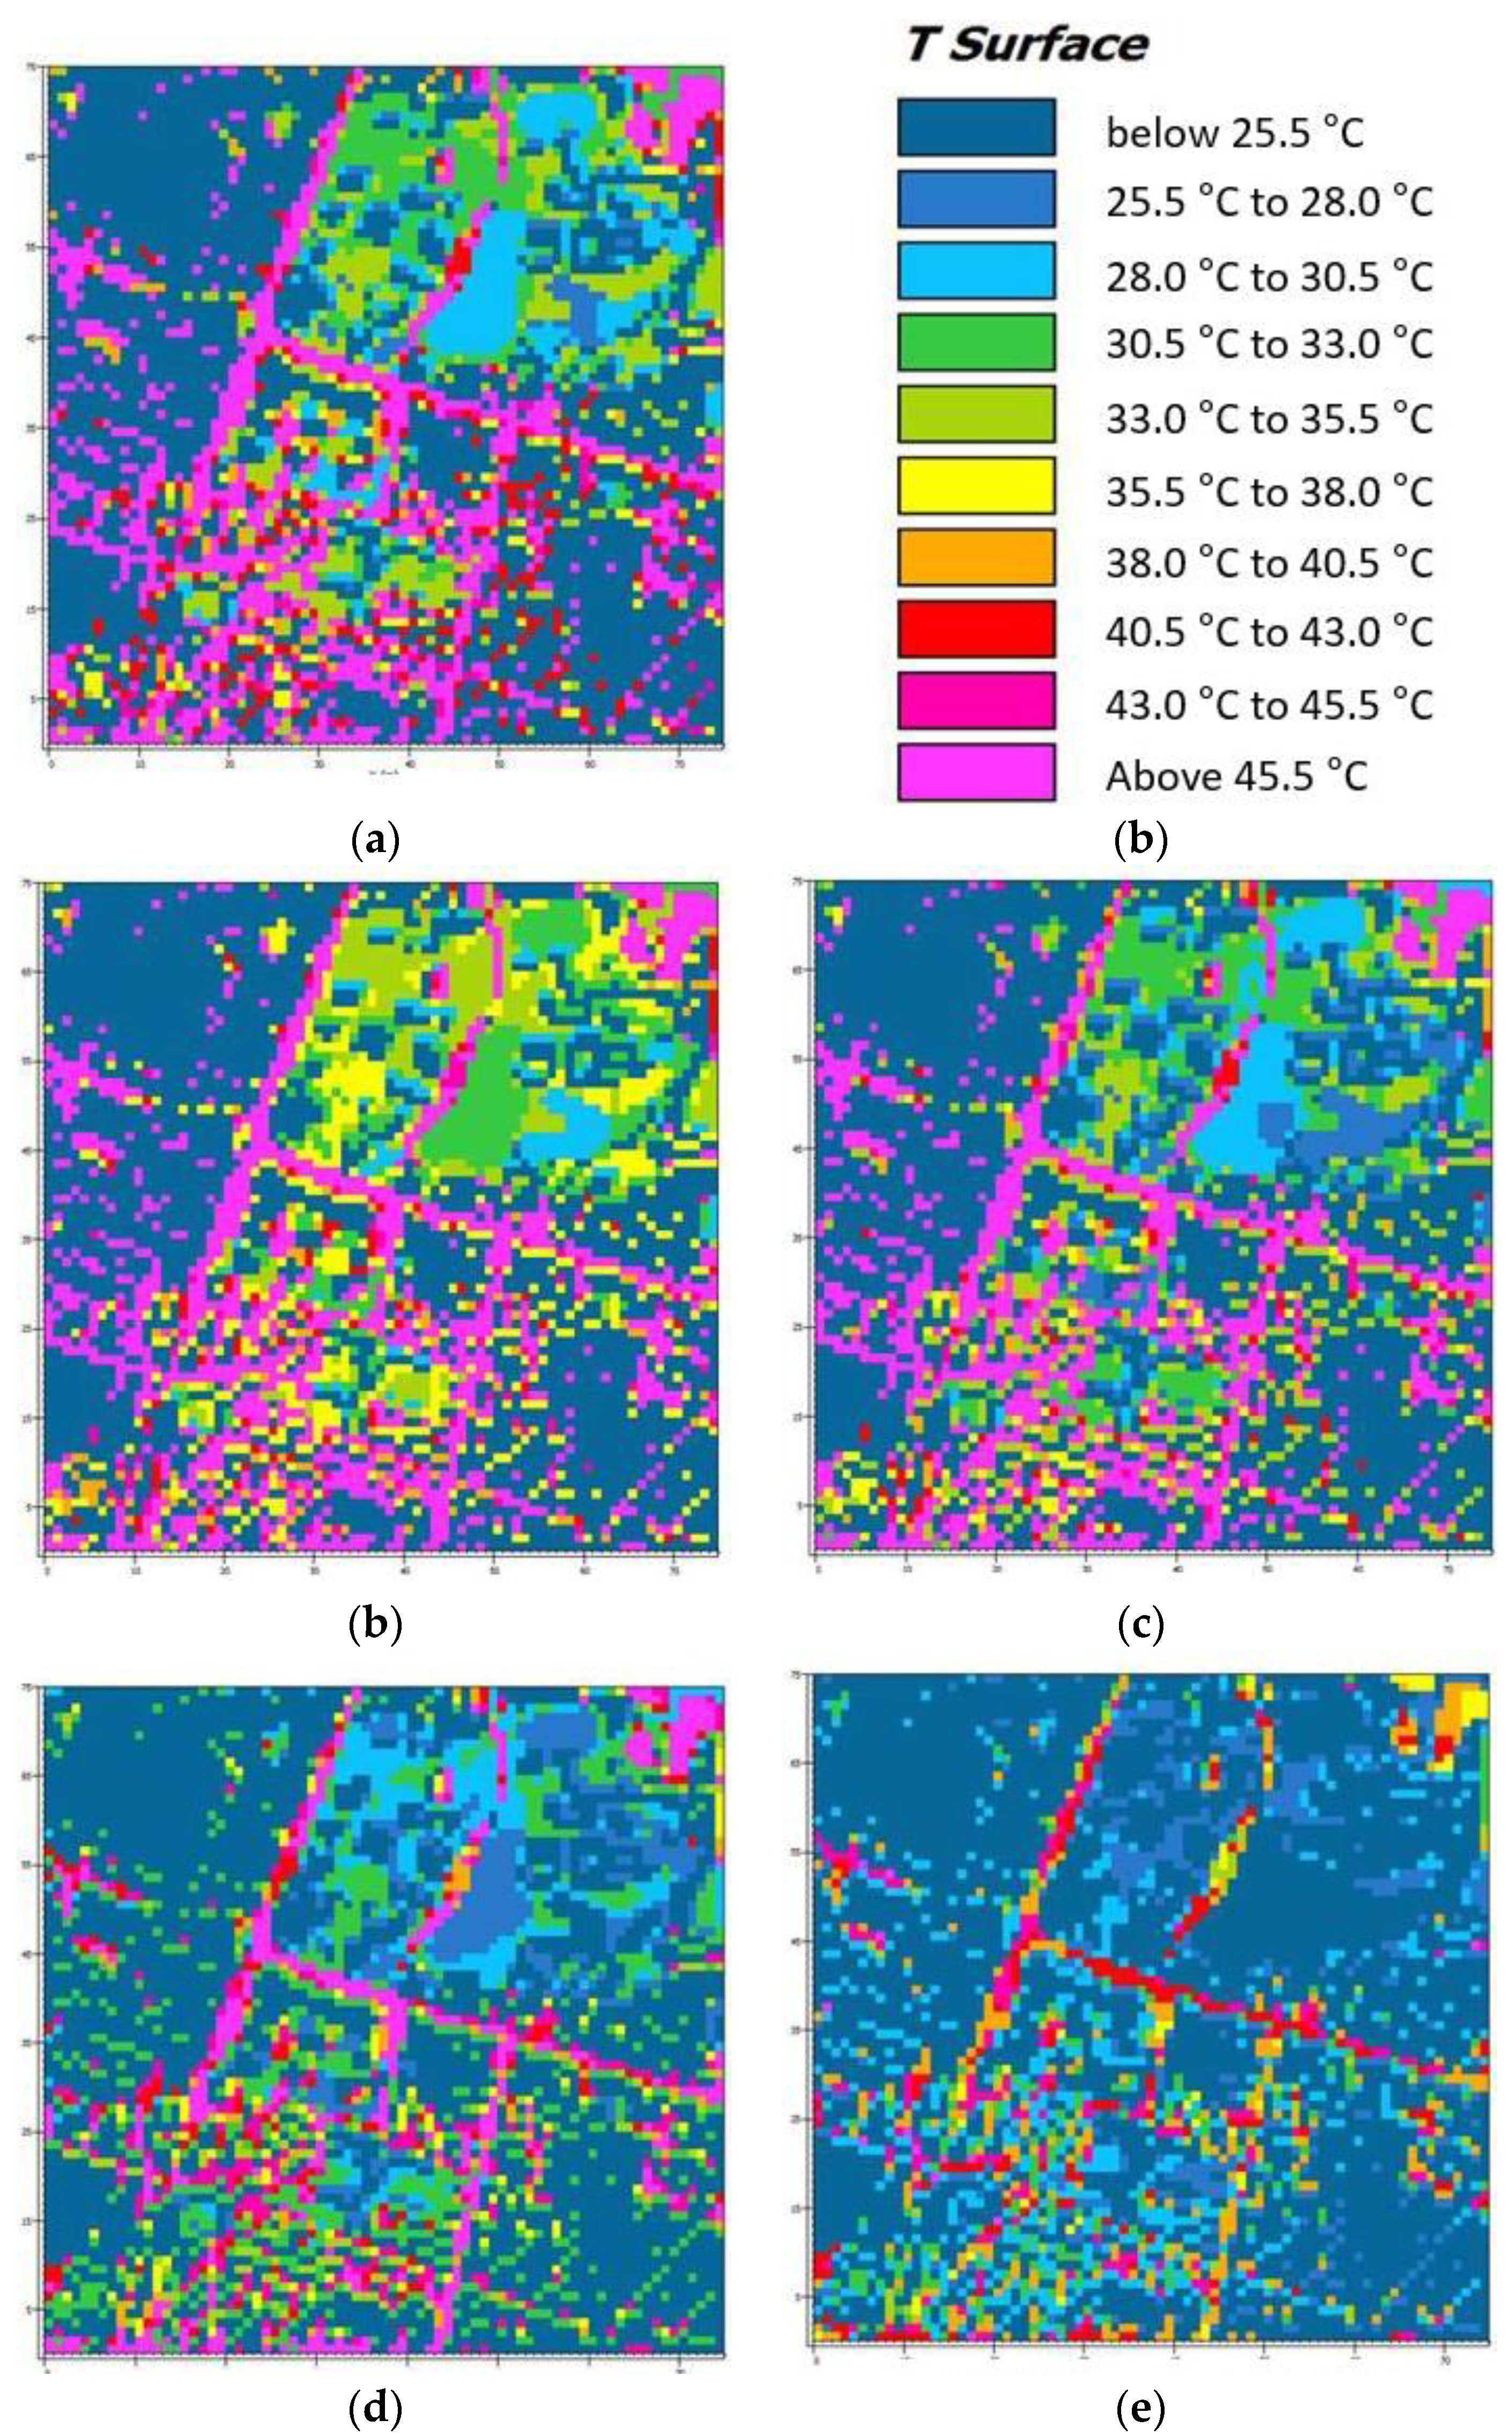 Sustainability | Free Full-Text | Analysis of Thermal Environment over a  Small-Scale Landscape in a Densely Built-Up Asian Megacity | HTML